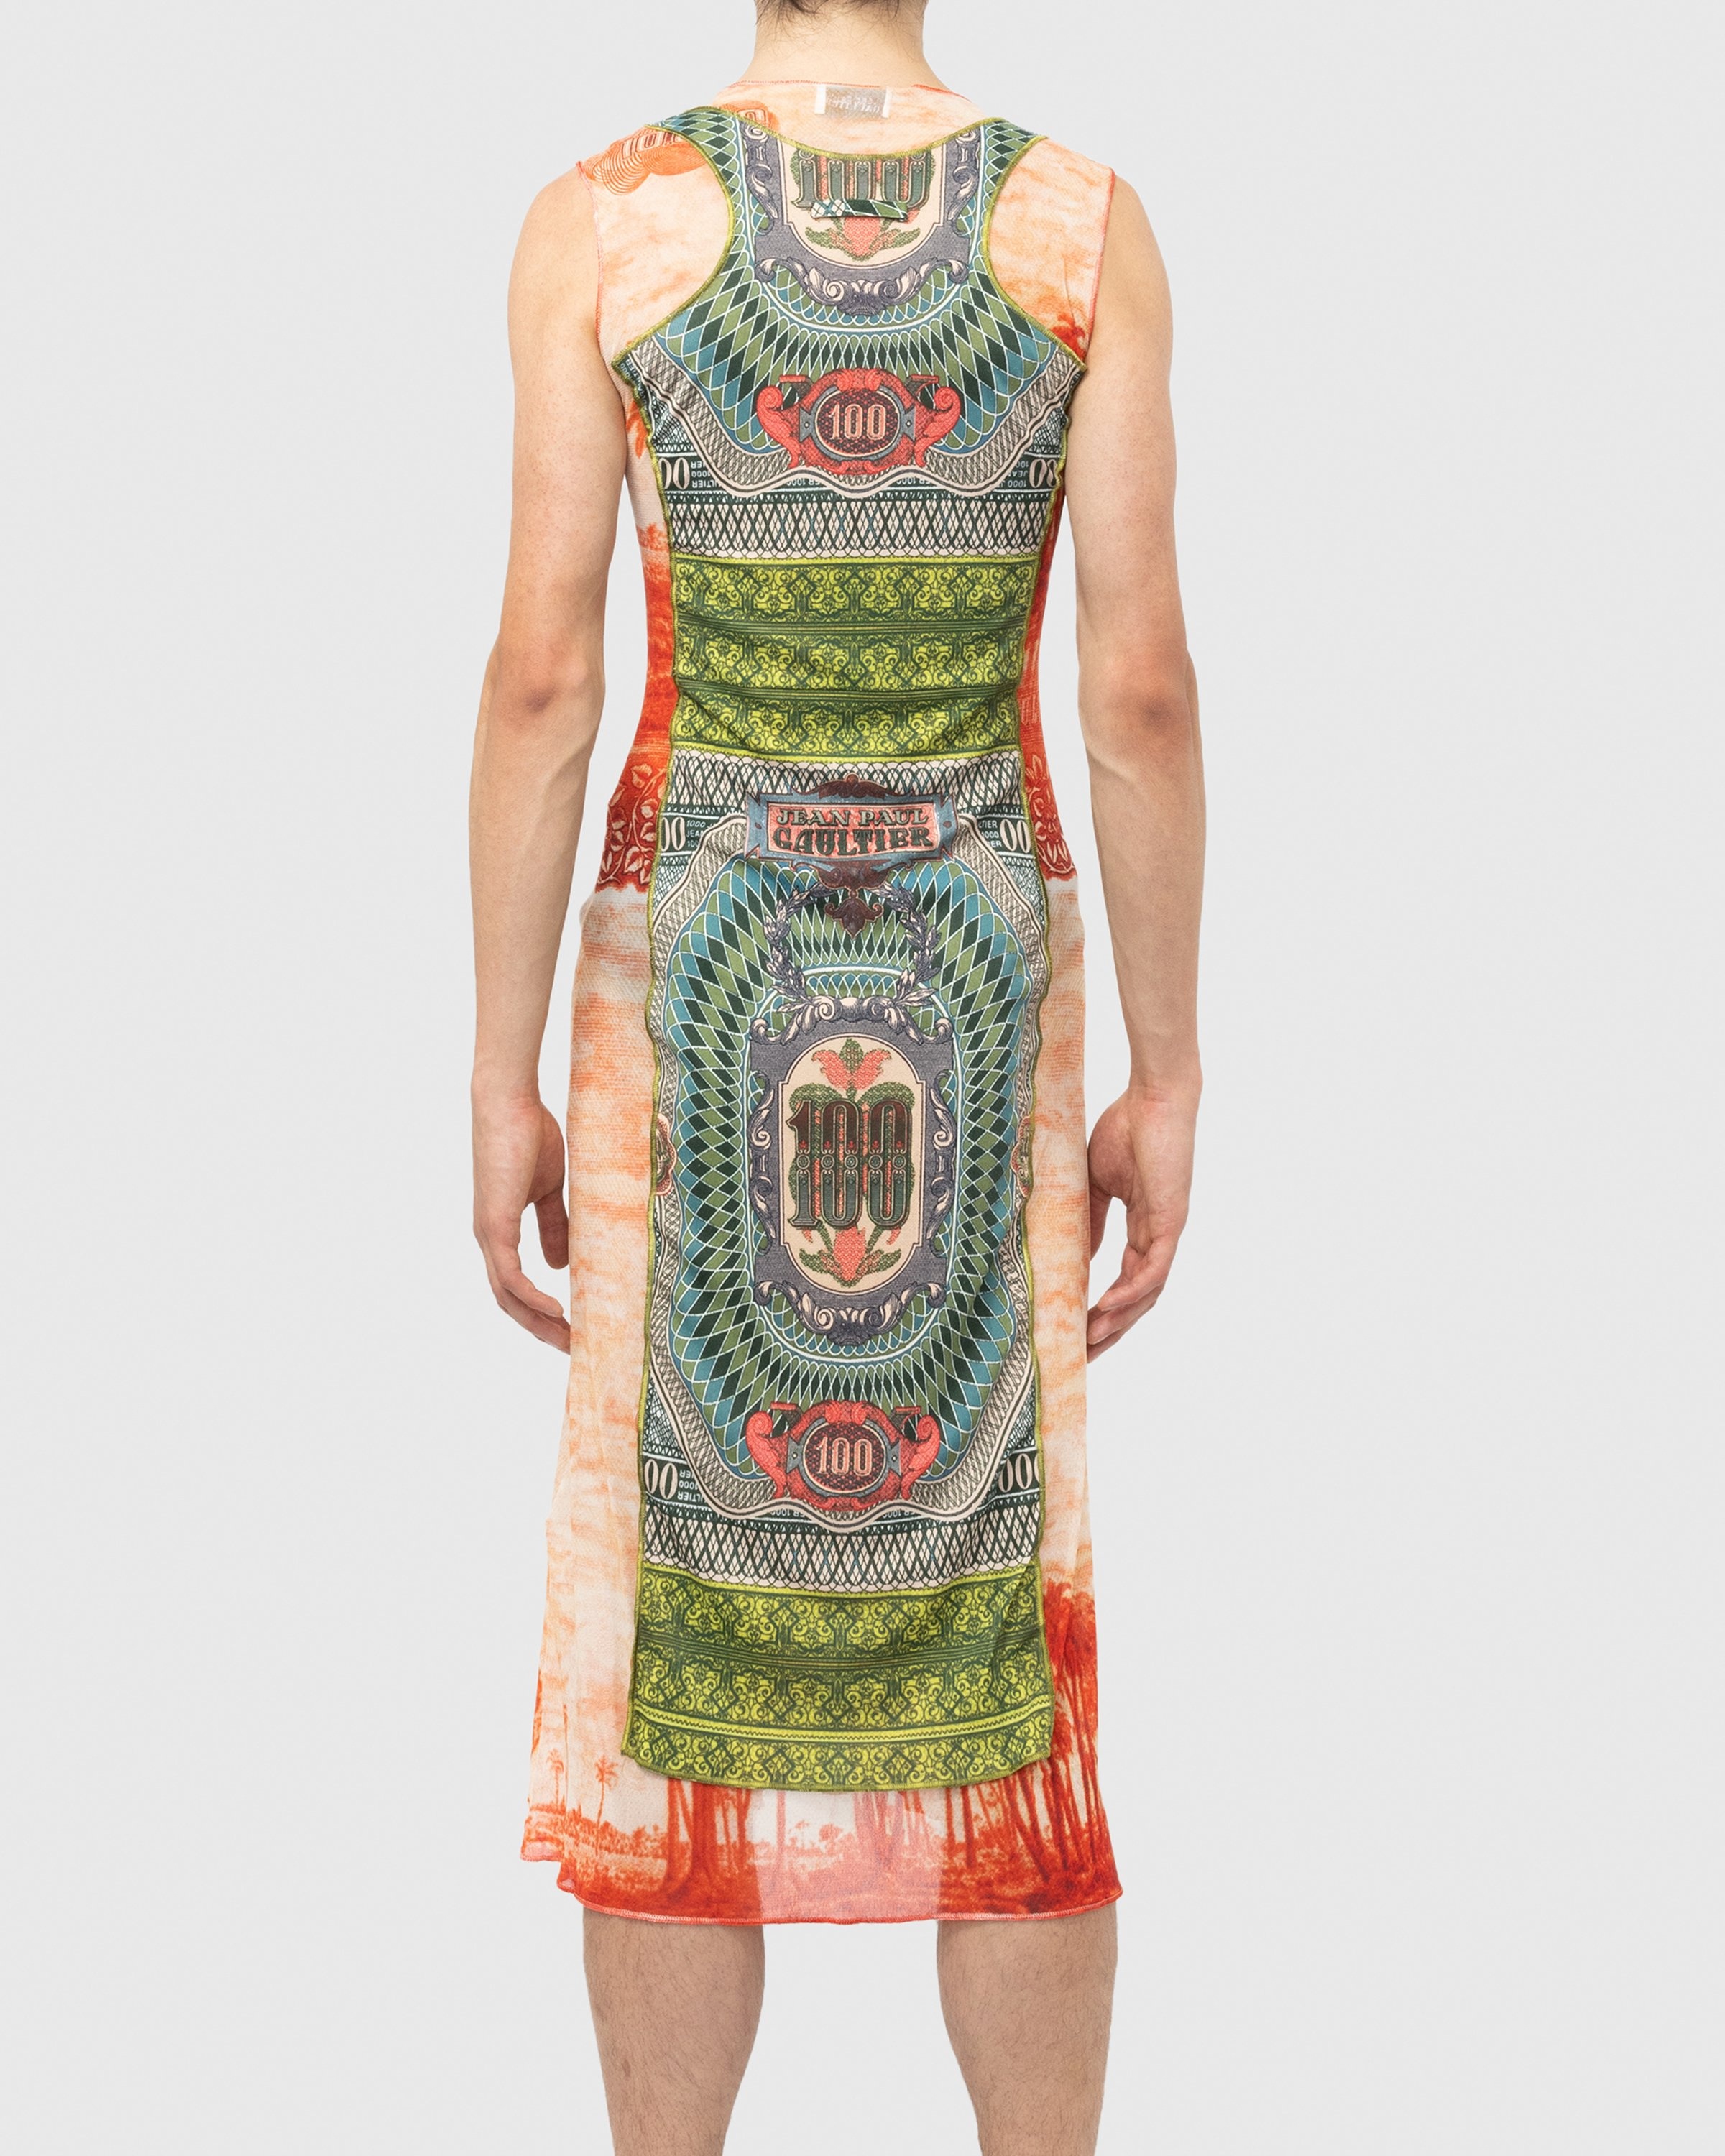 Jean Paul Gaultier – Banknote and Palm Tree Print Dress Multi - Dresses & Skirts - Green - Image 4